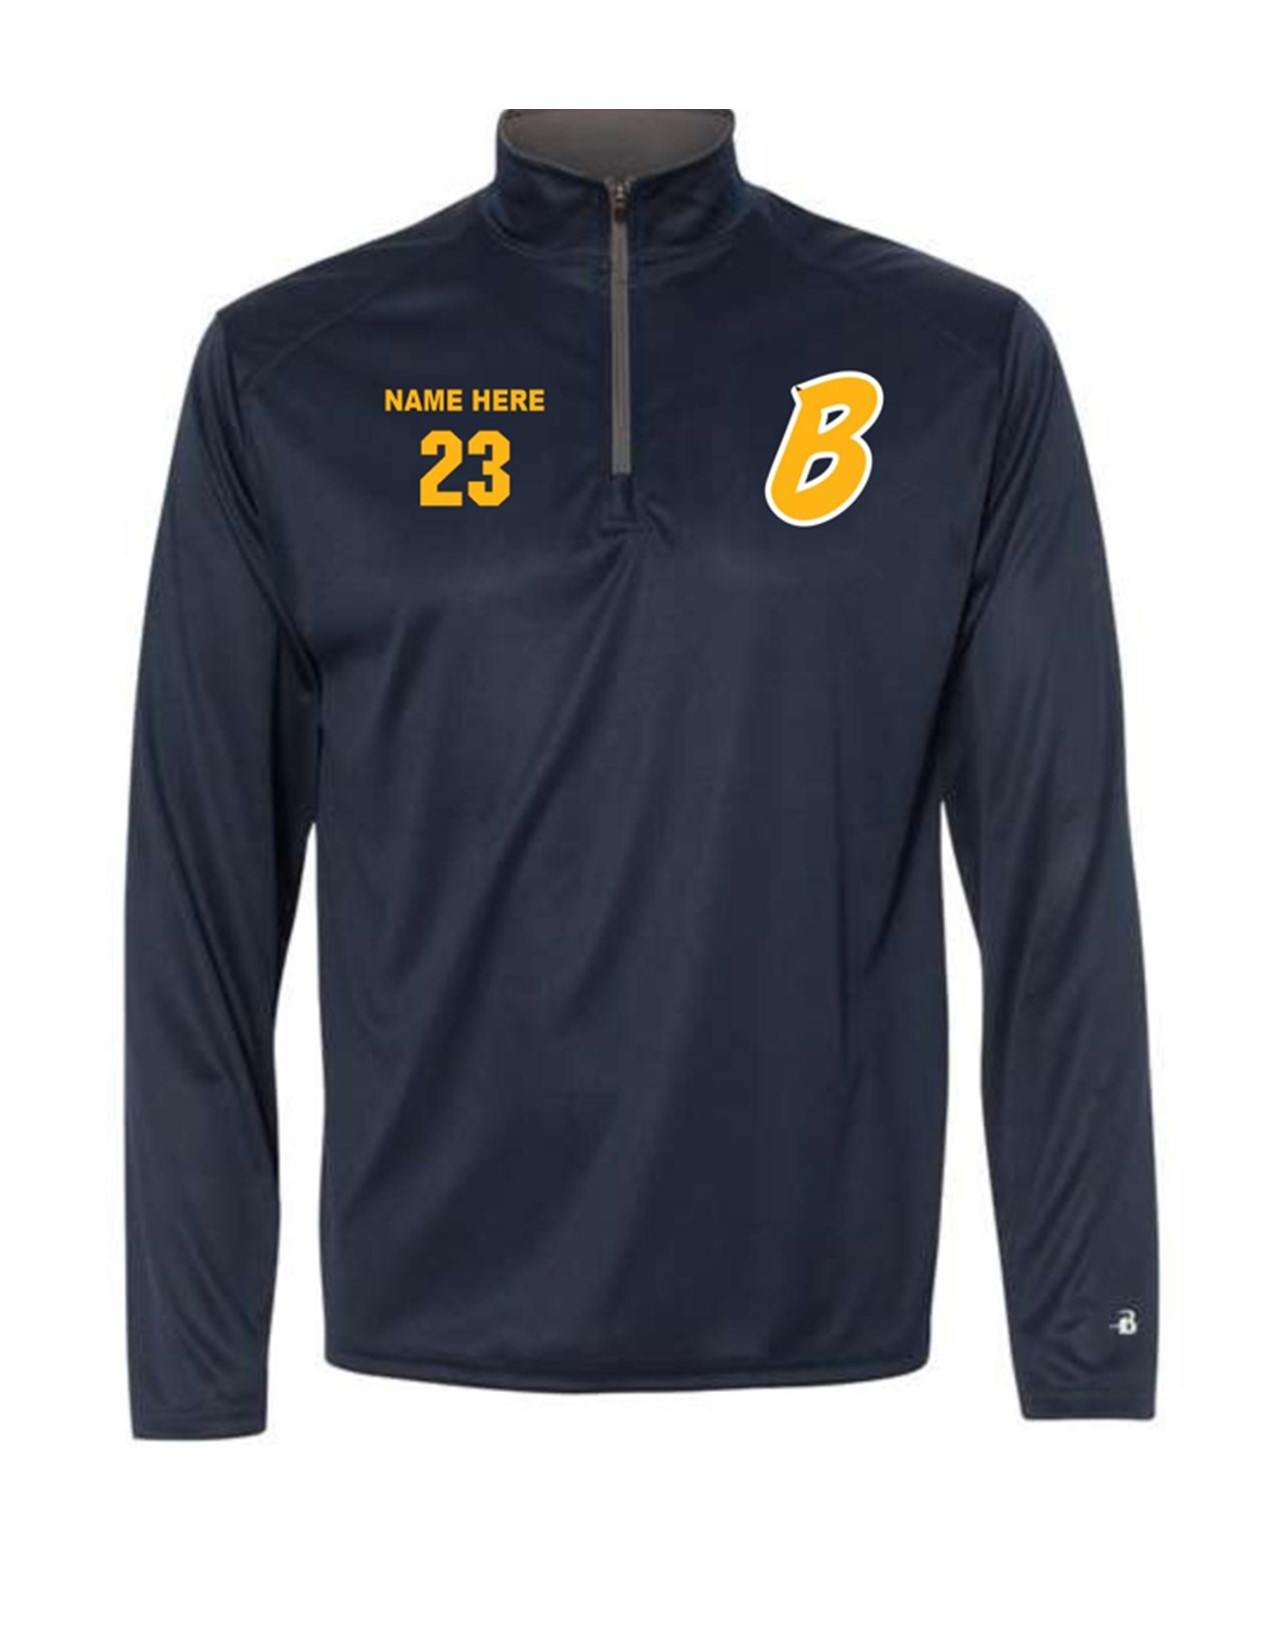 93 Badger 2102 Youth B-Core 1/4 Zip with Embroidery